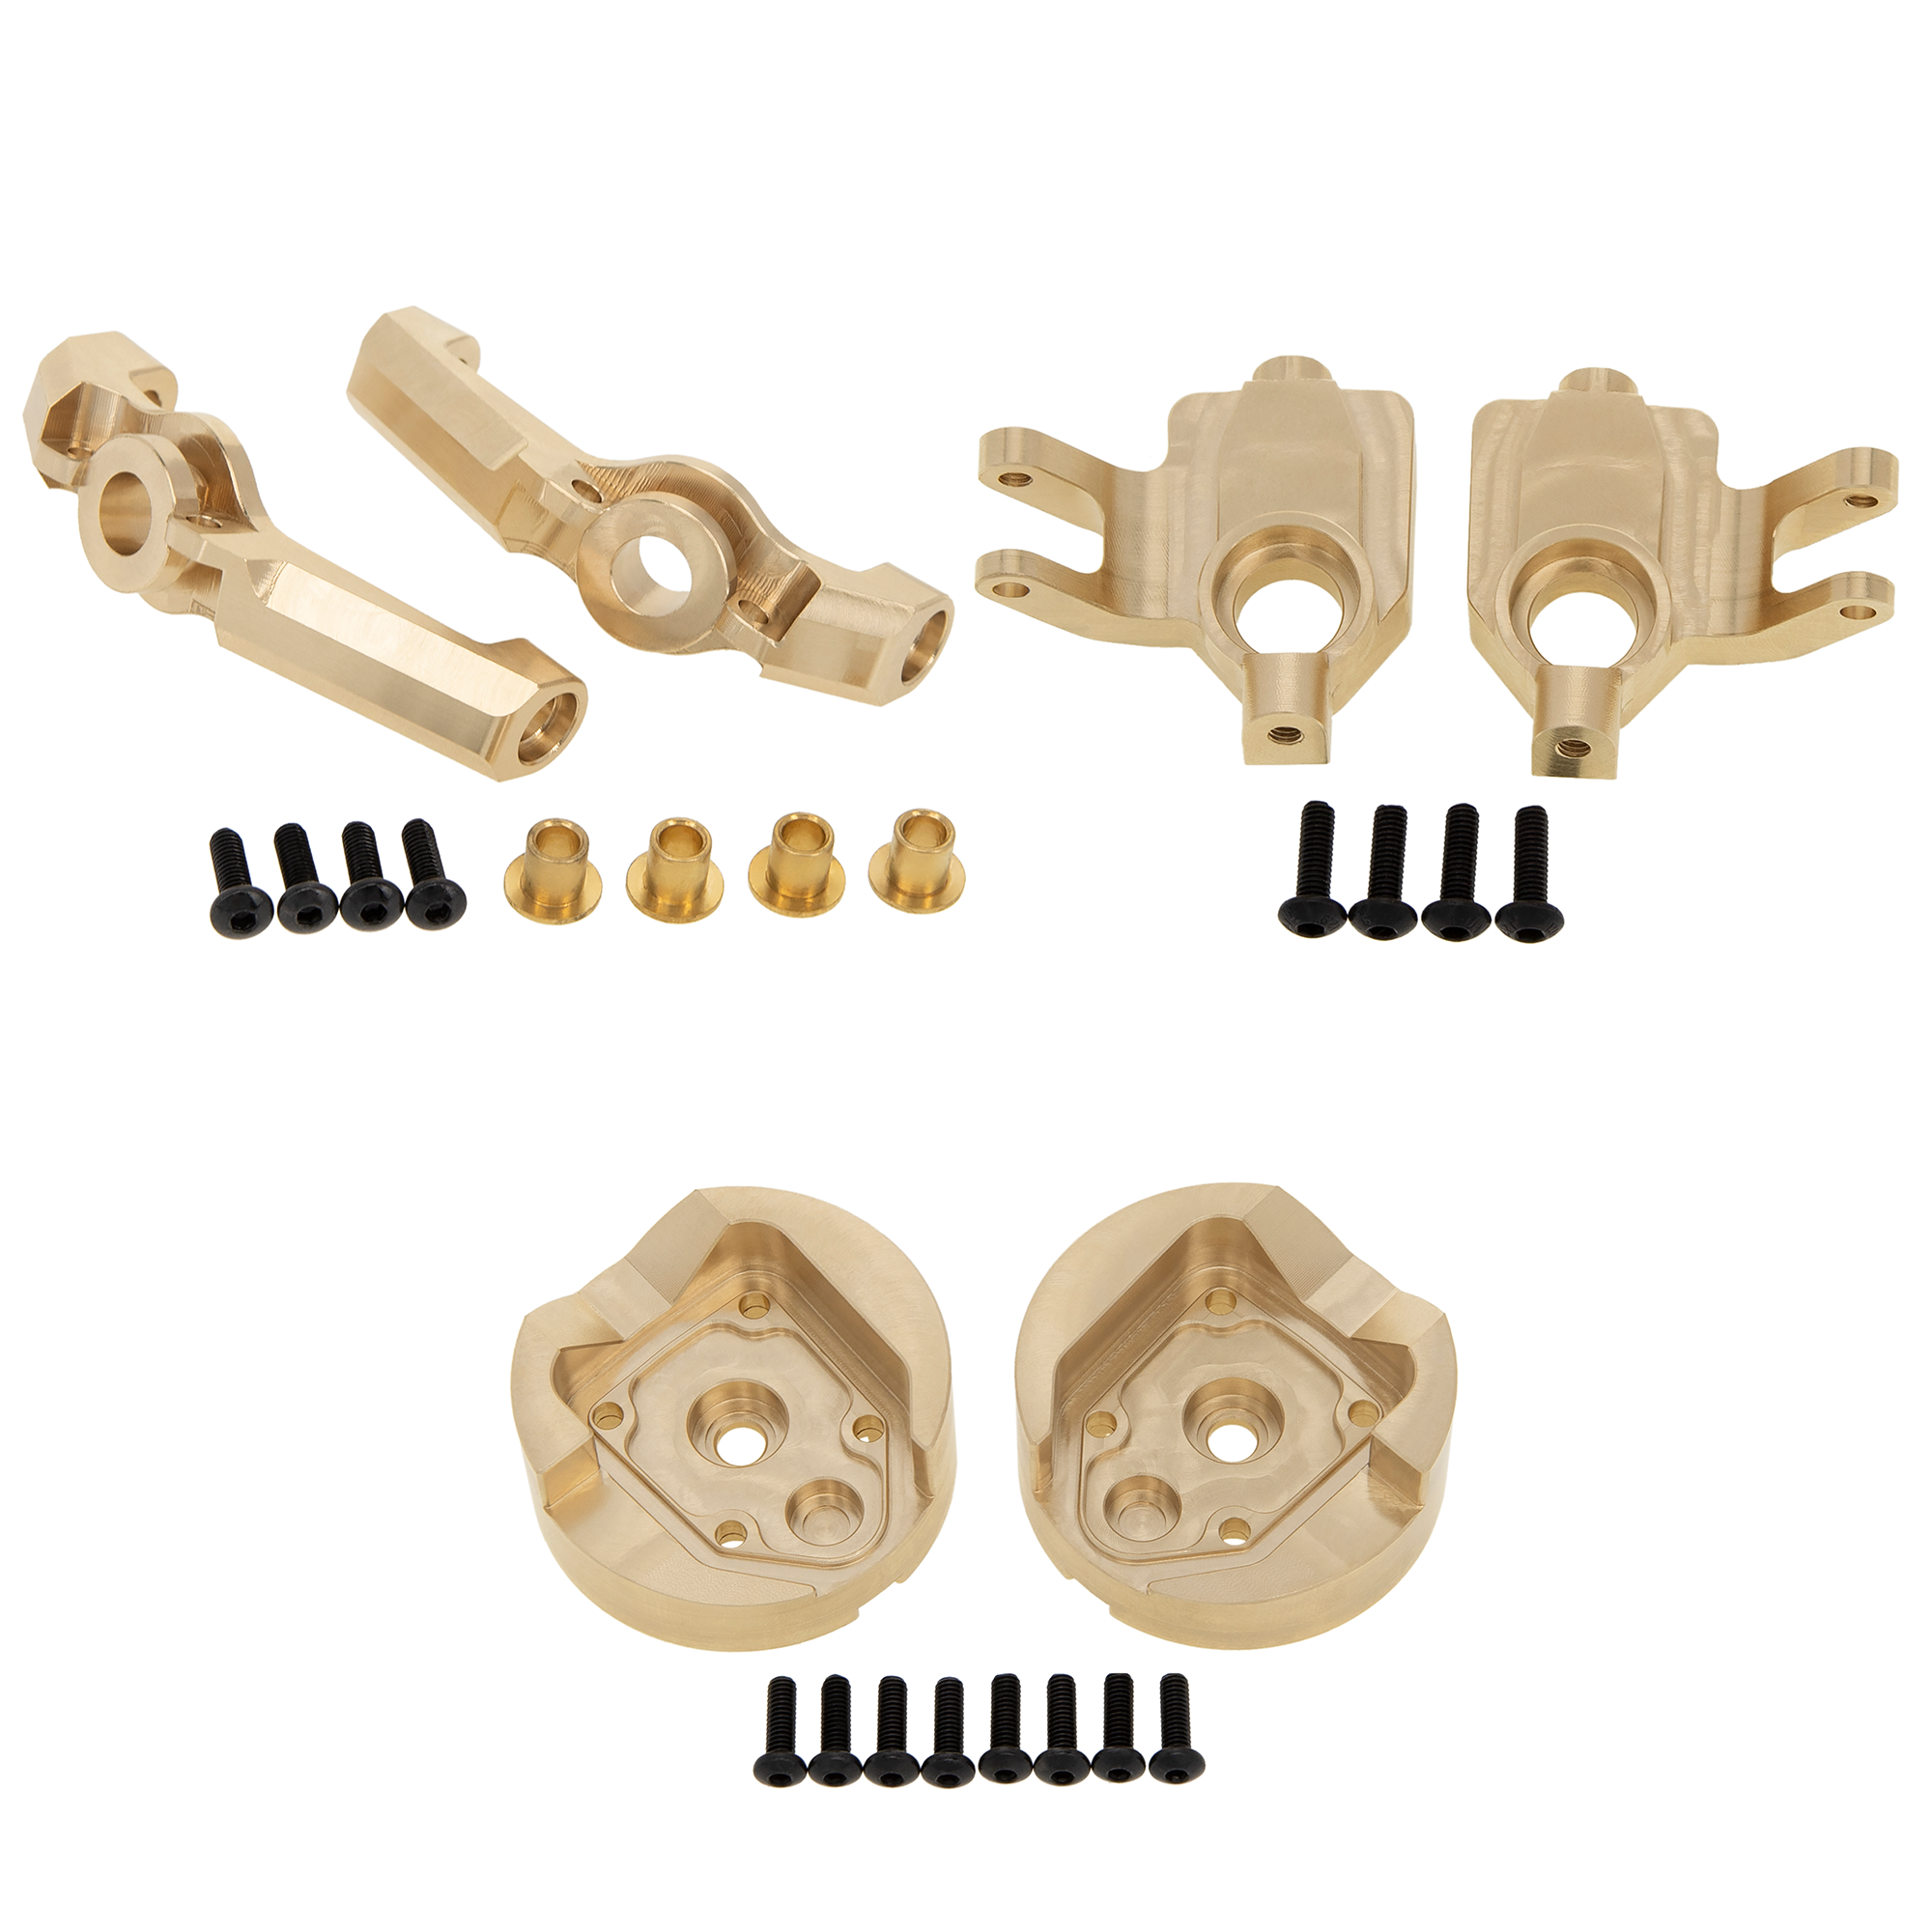 Meus Racing Brass Steering Knuckles C-hubs Front Rear Gear Covers Fron